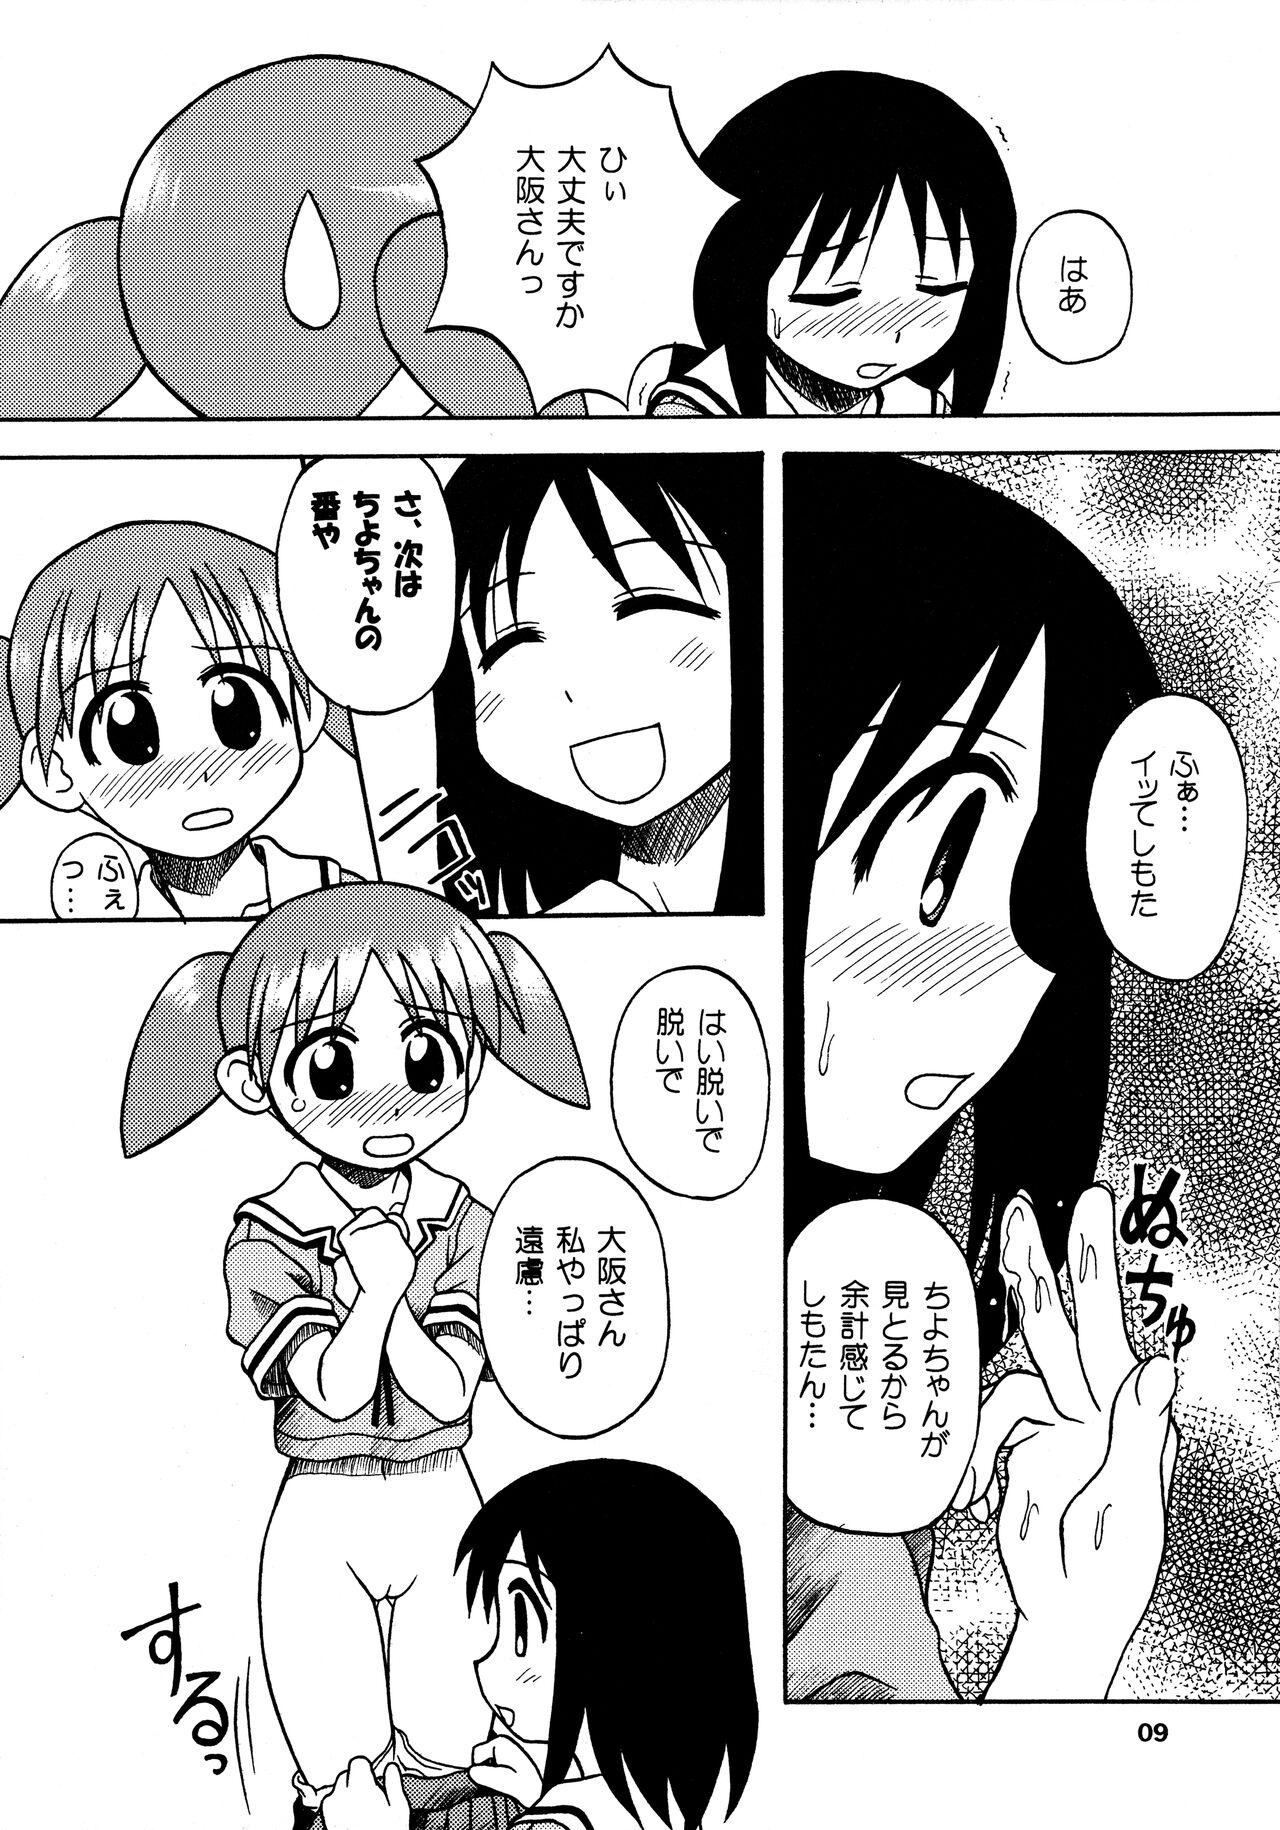 Hood ANOTHER LIFE - Azumanga daioh Pack - Page 9